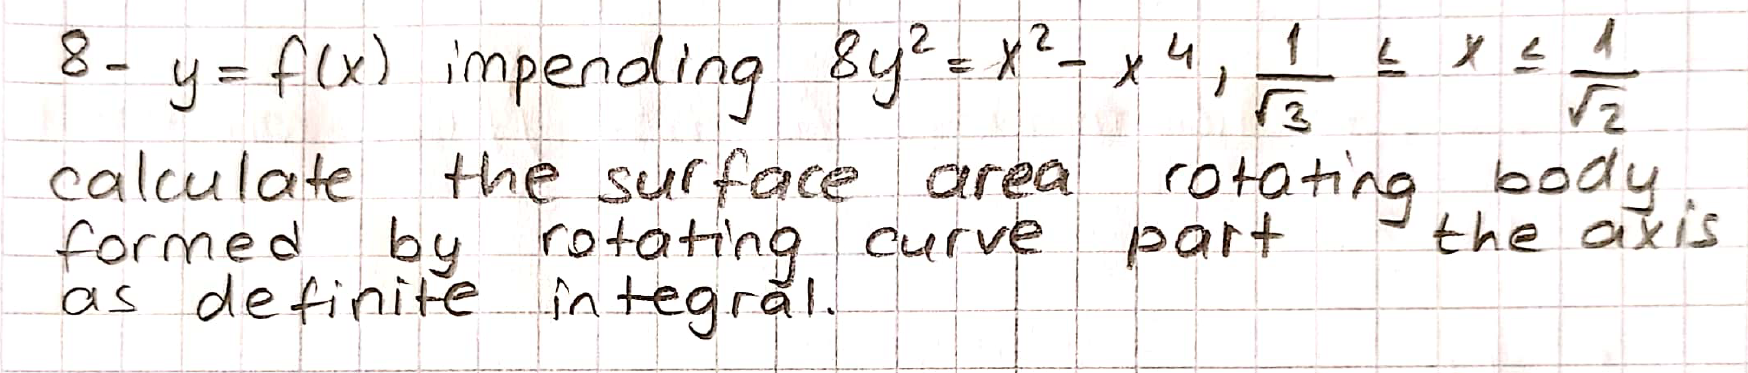 8.
y = f(x) impending 8y?=x?- xu,
1
4.
calculate
formed
as definite integrål.
the surface area rotating body
by rotating curve
part
the axis
